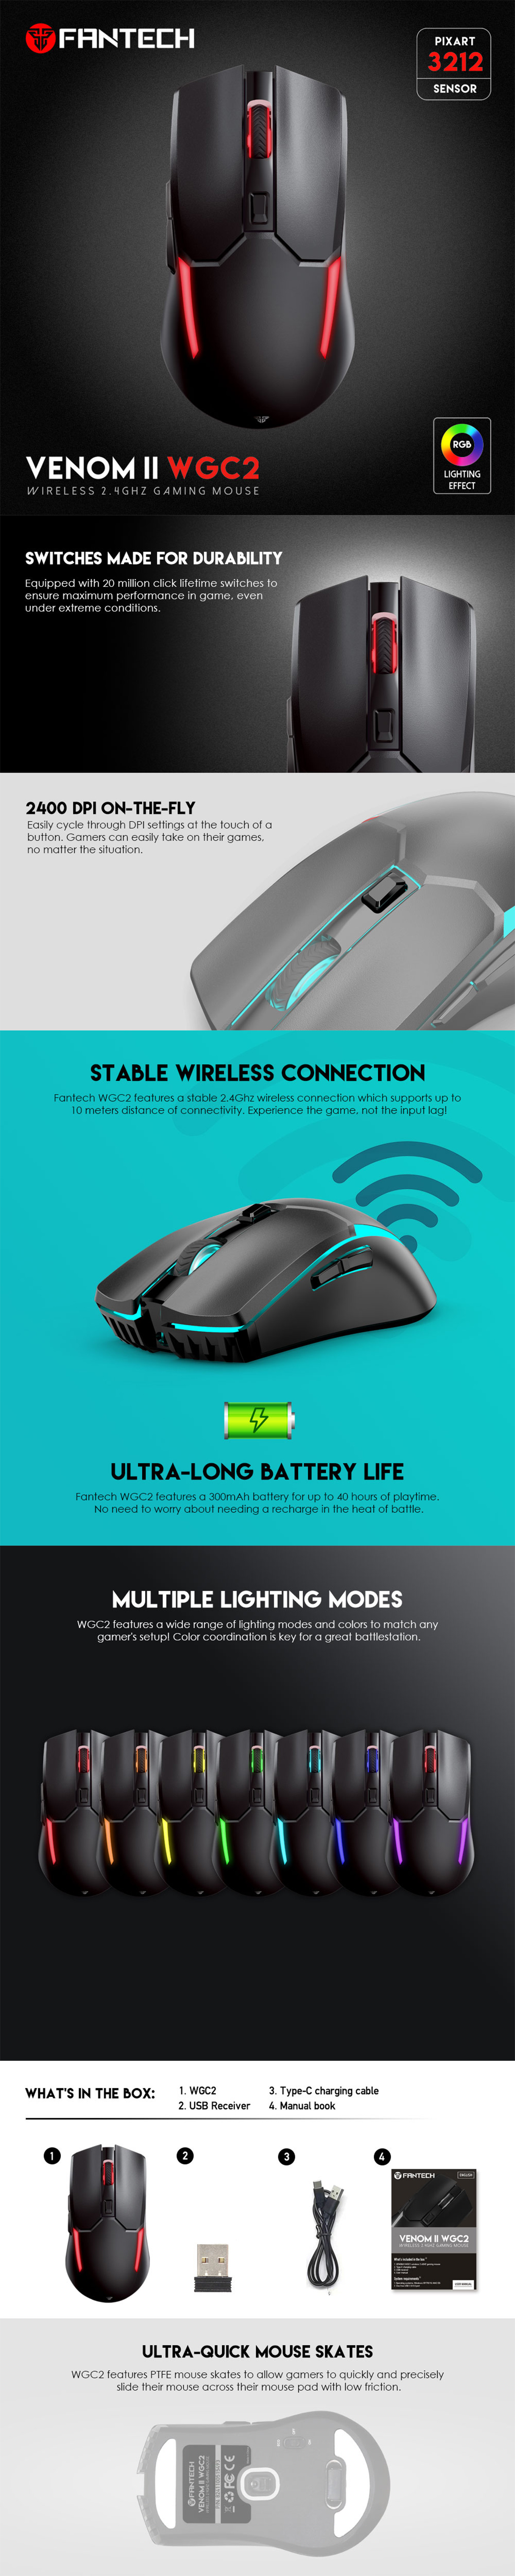 A large marketing image providing additional information about the product Fantech VENOM II WGC2 Wireless Gaming Mouse - Black - Additional alt info not provided